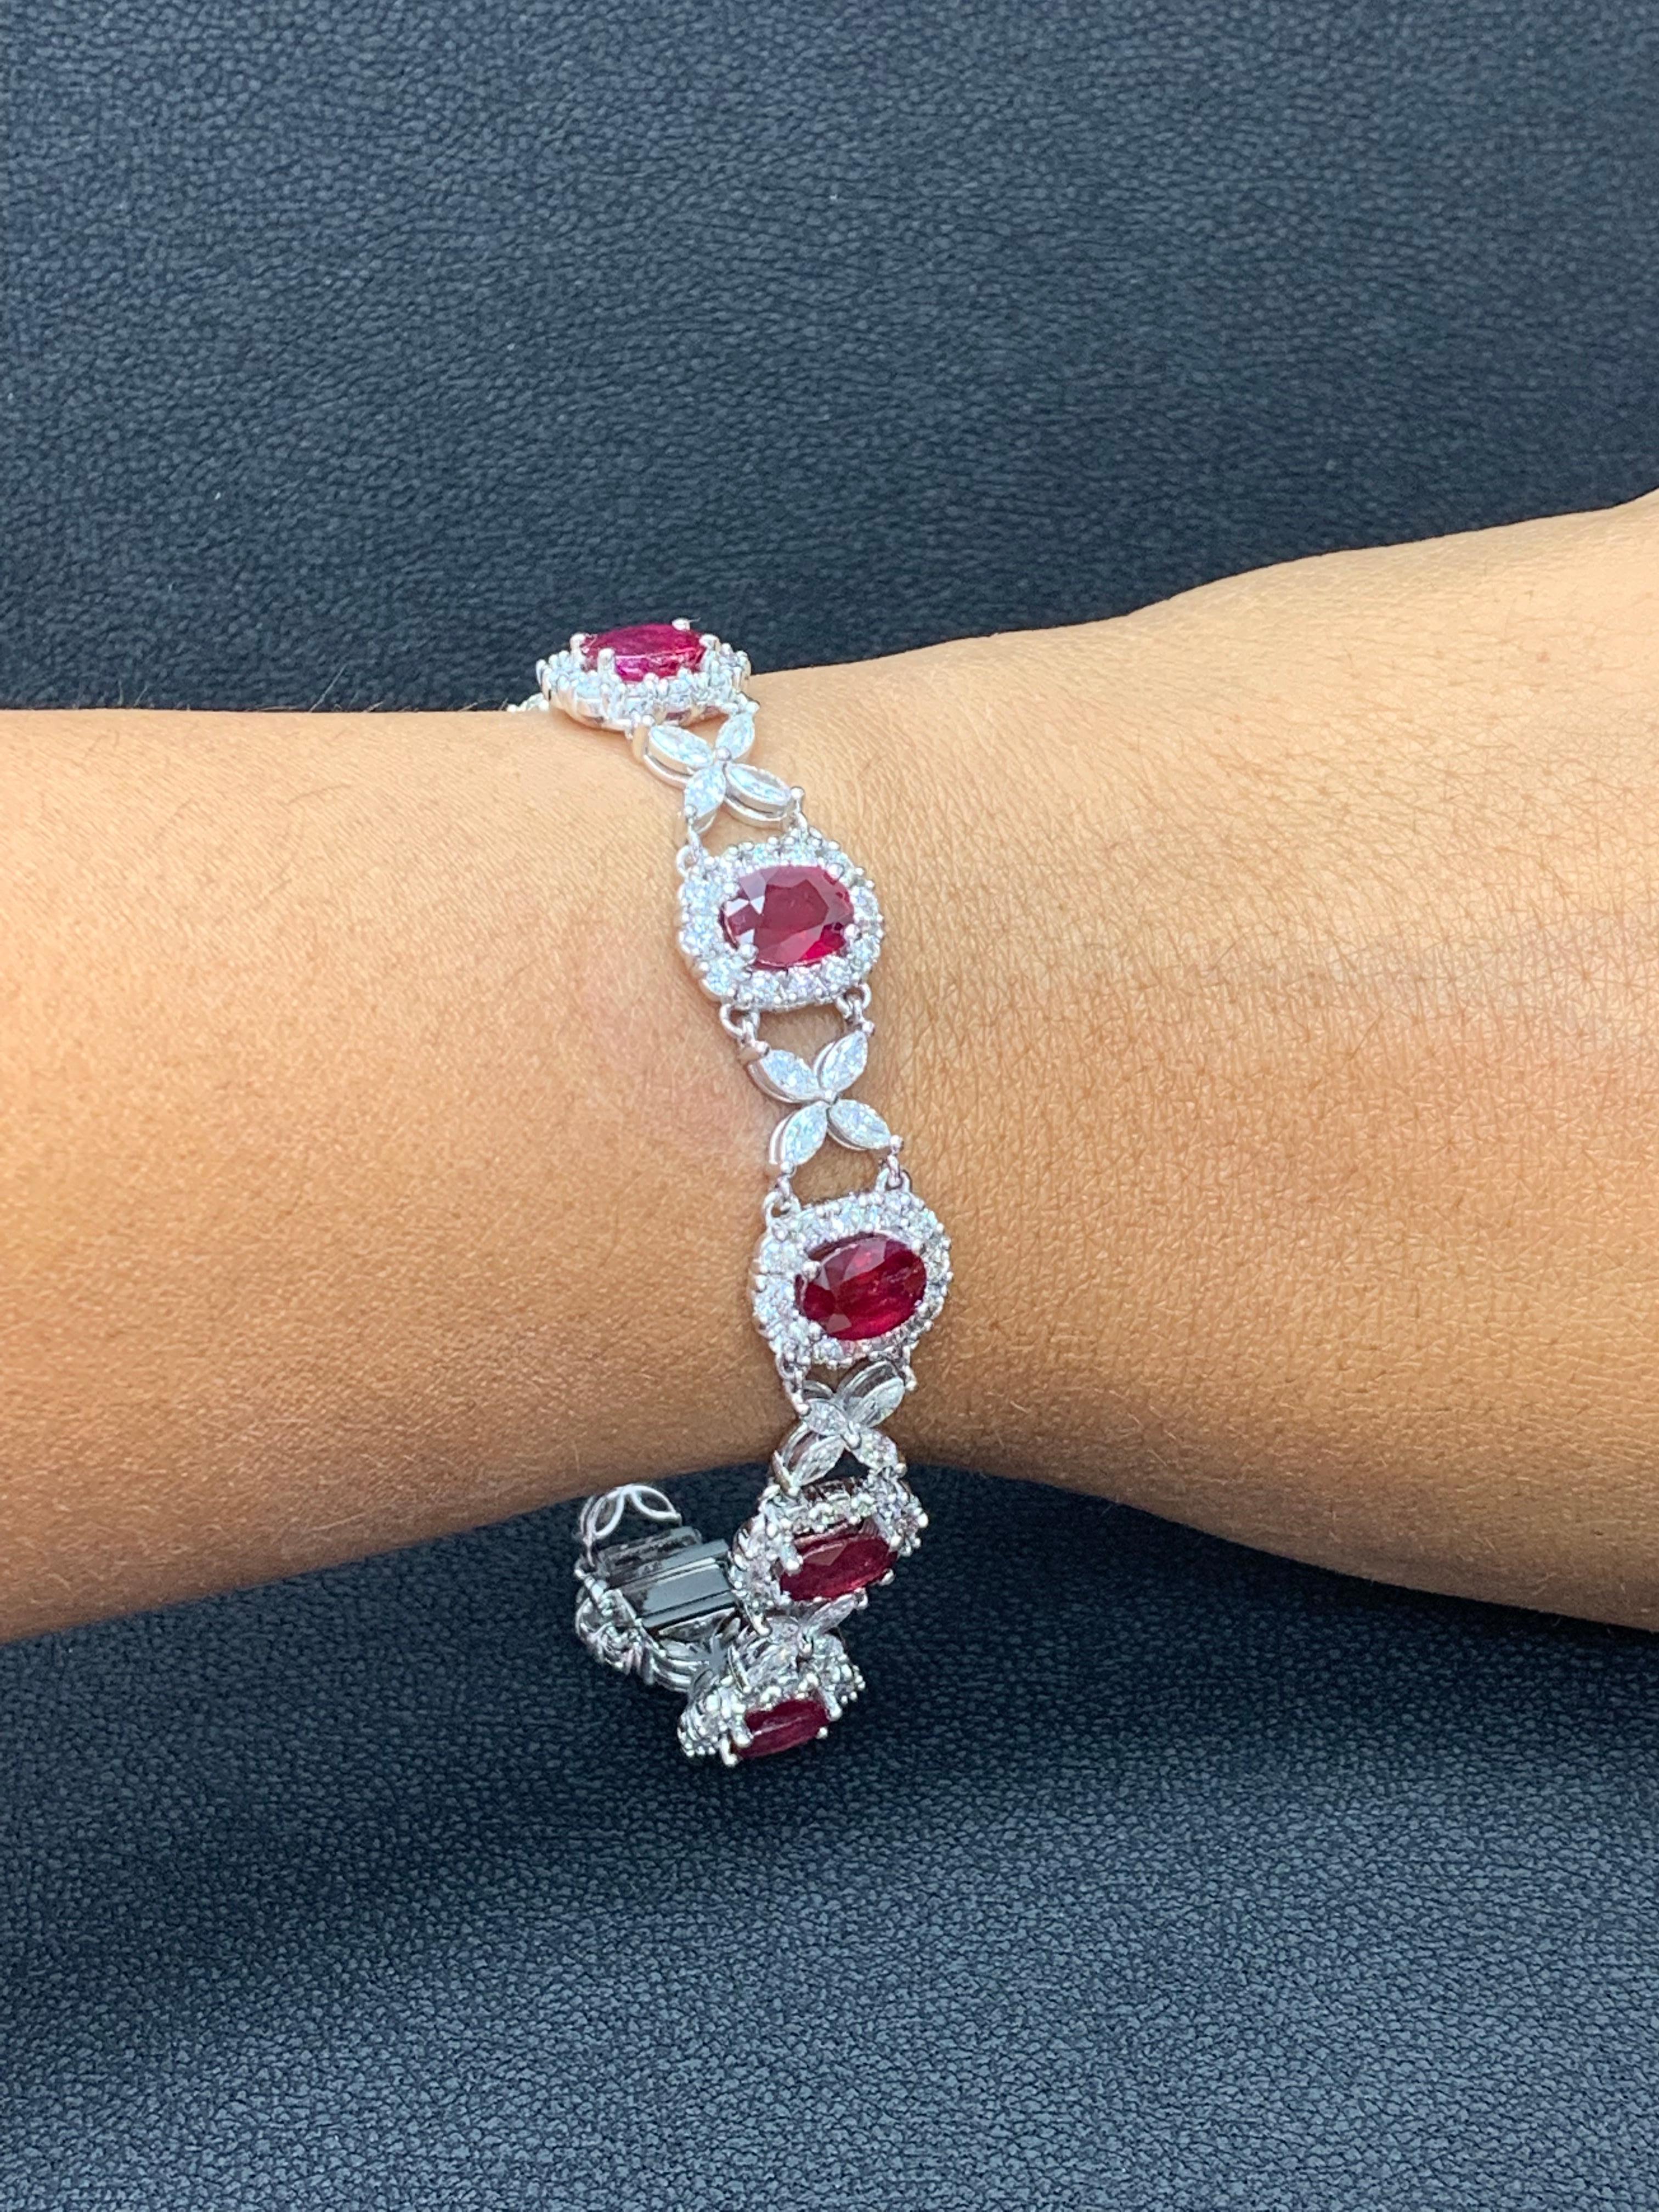 12.54 Carat Oval Cut Ruby and Diamond Tennis Bracelet in 14K White Gold For Sale 12